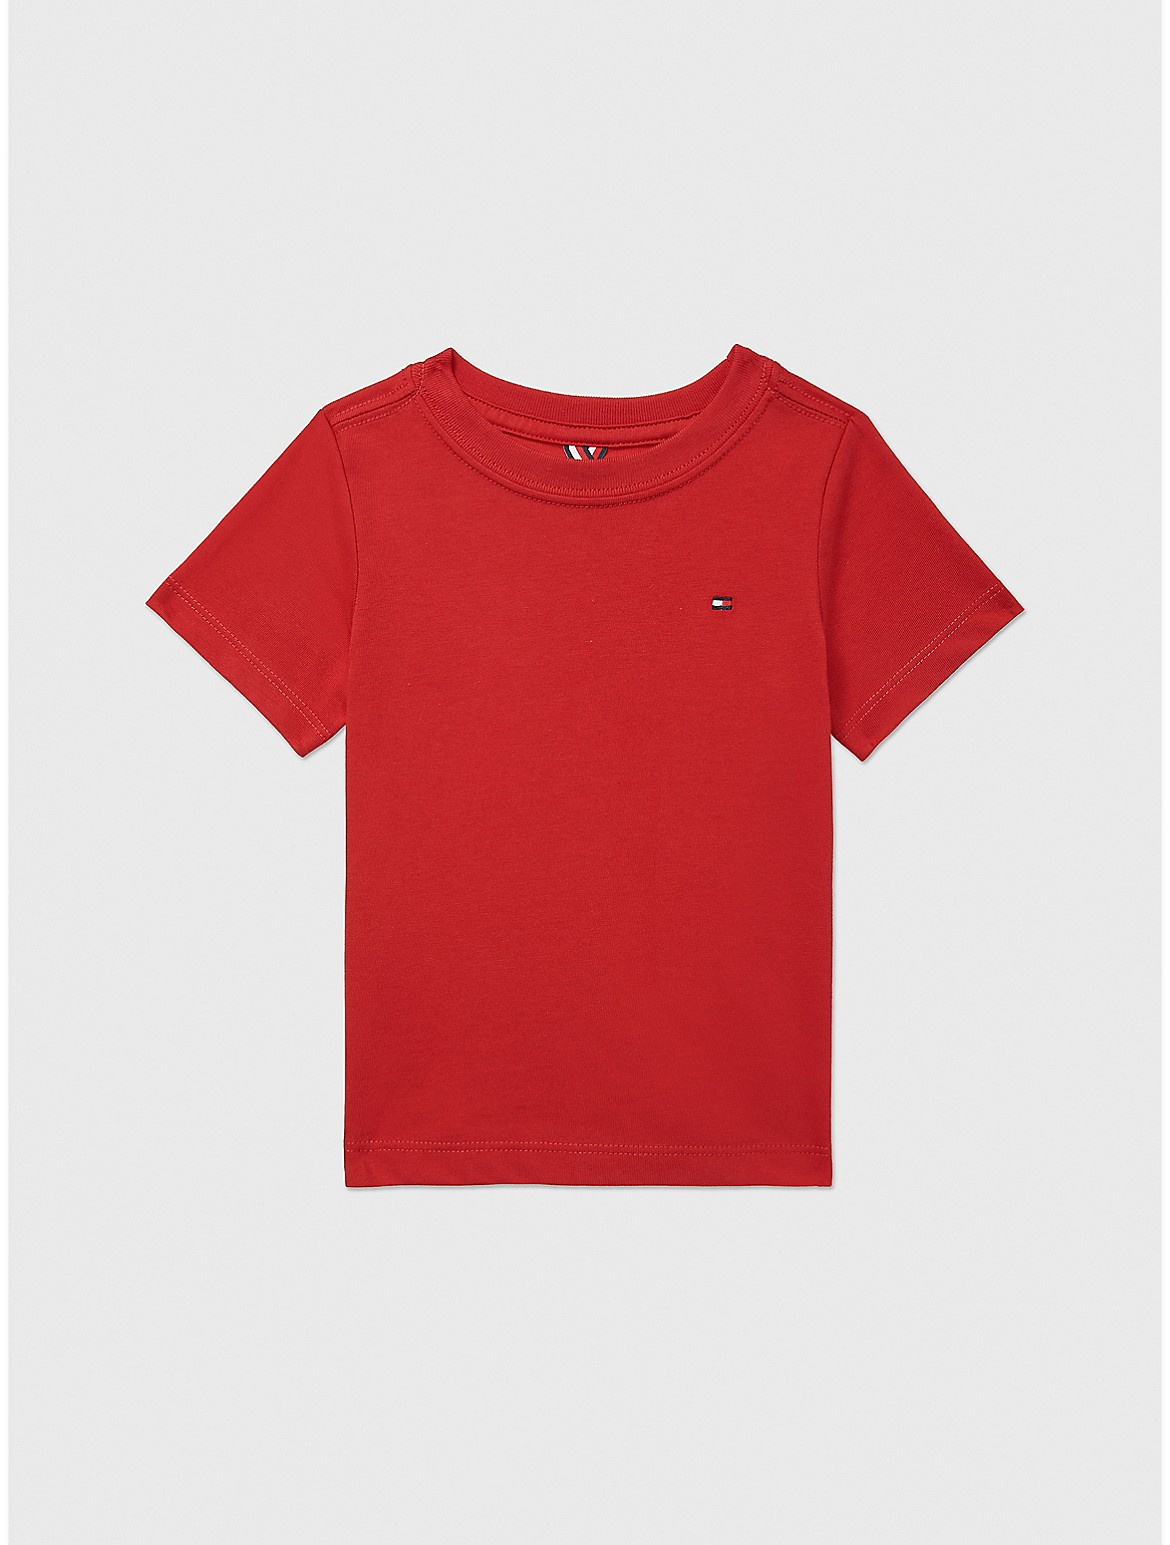 Tommy Hilfiger Boys' Babies' Solid T-Shirt - Red - 12M